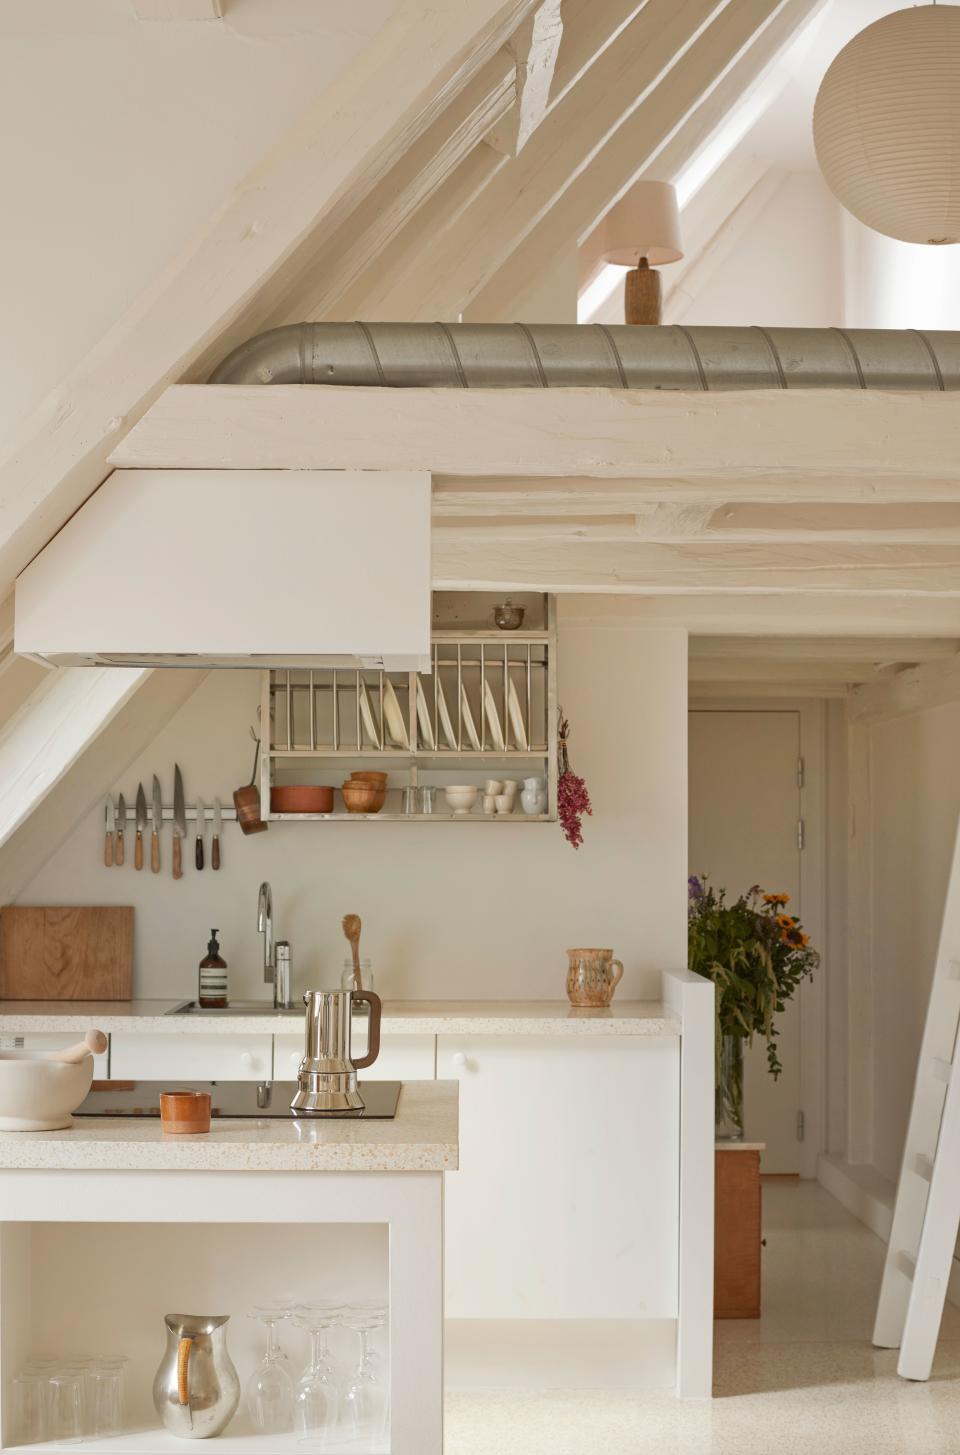 The kitchen is where designer Caroline Feiffer spends quite a lot of time in her home in Old Copenhagen. At top right, a glimpse of the lofted office. The height of the ceilings makes for a feeling of airy spaciousness, as well as a connectivity between the rooms.